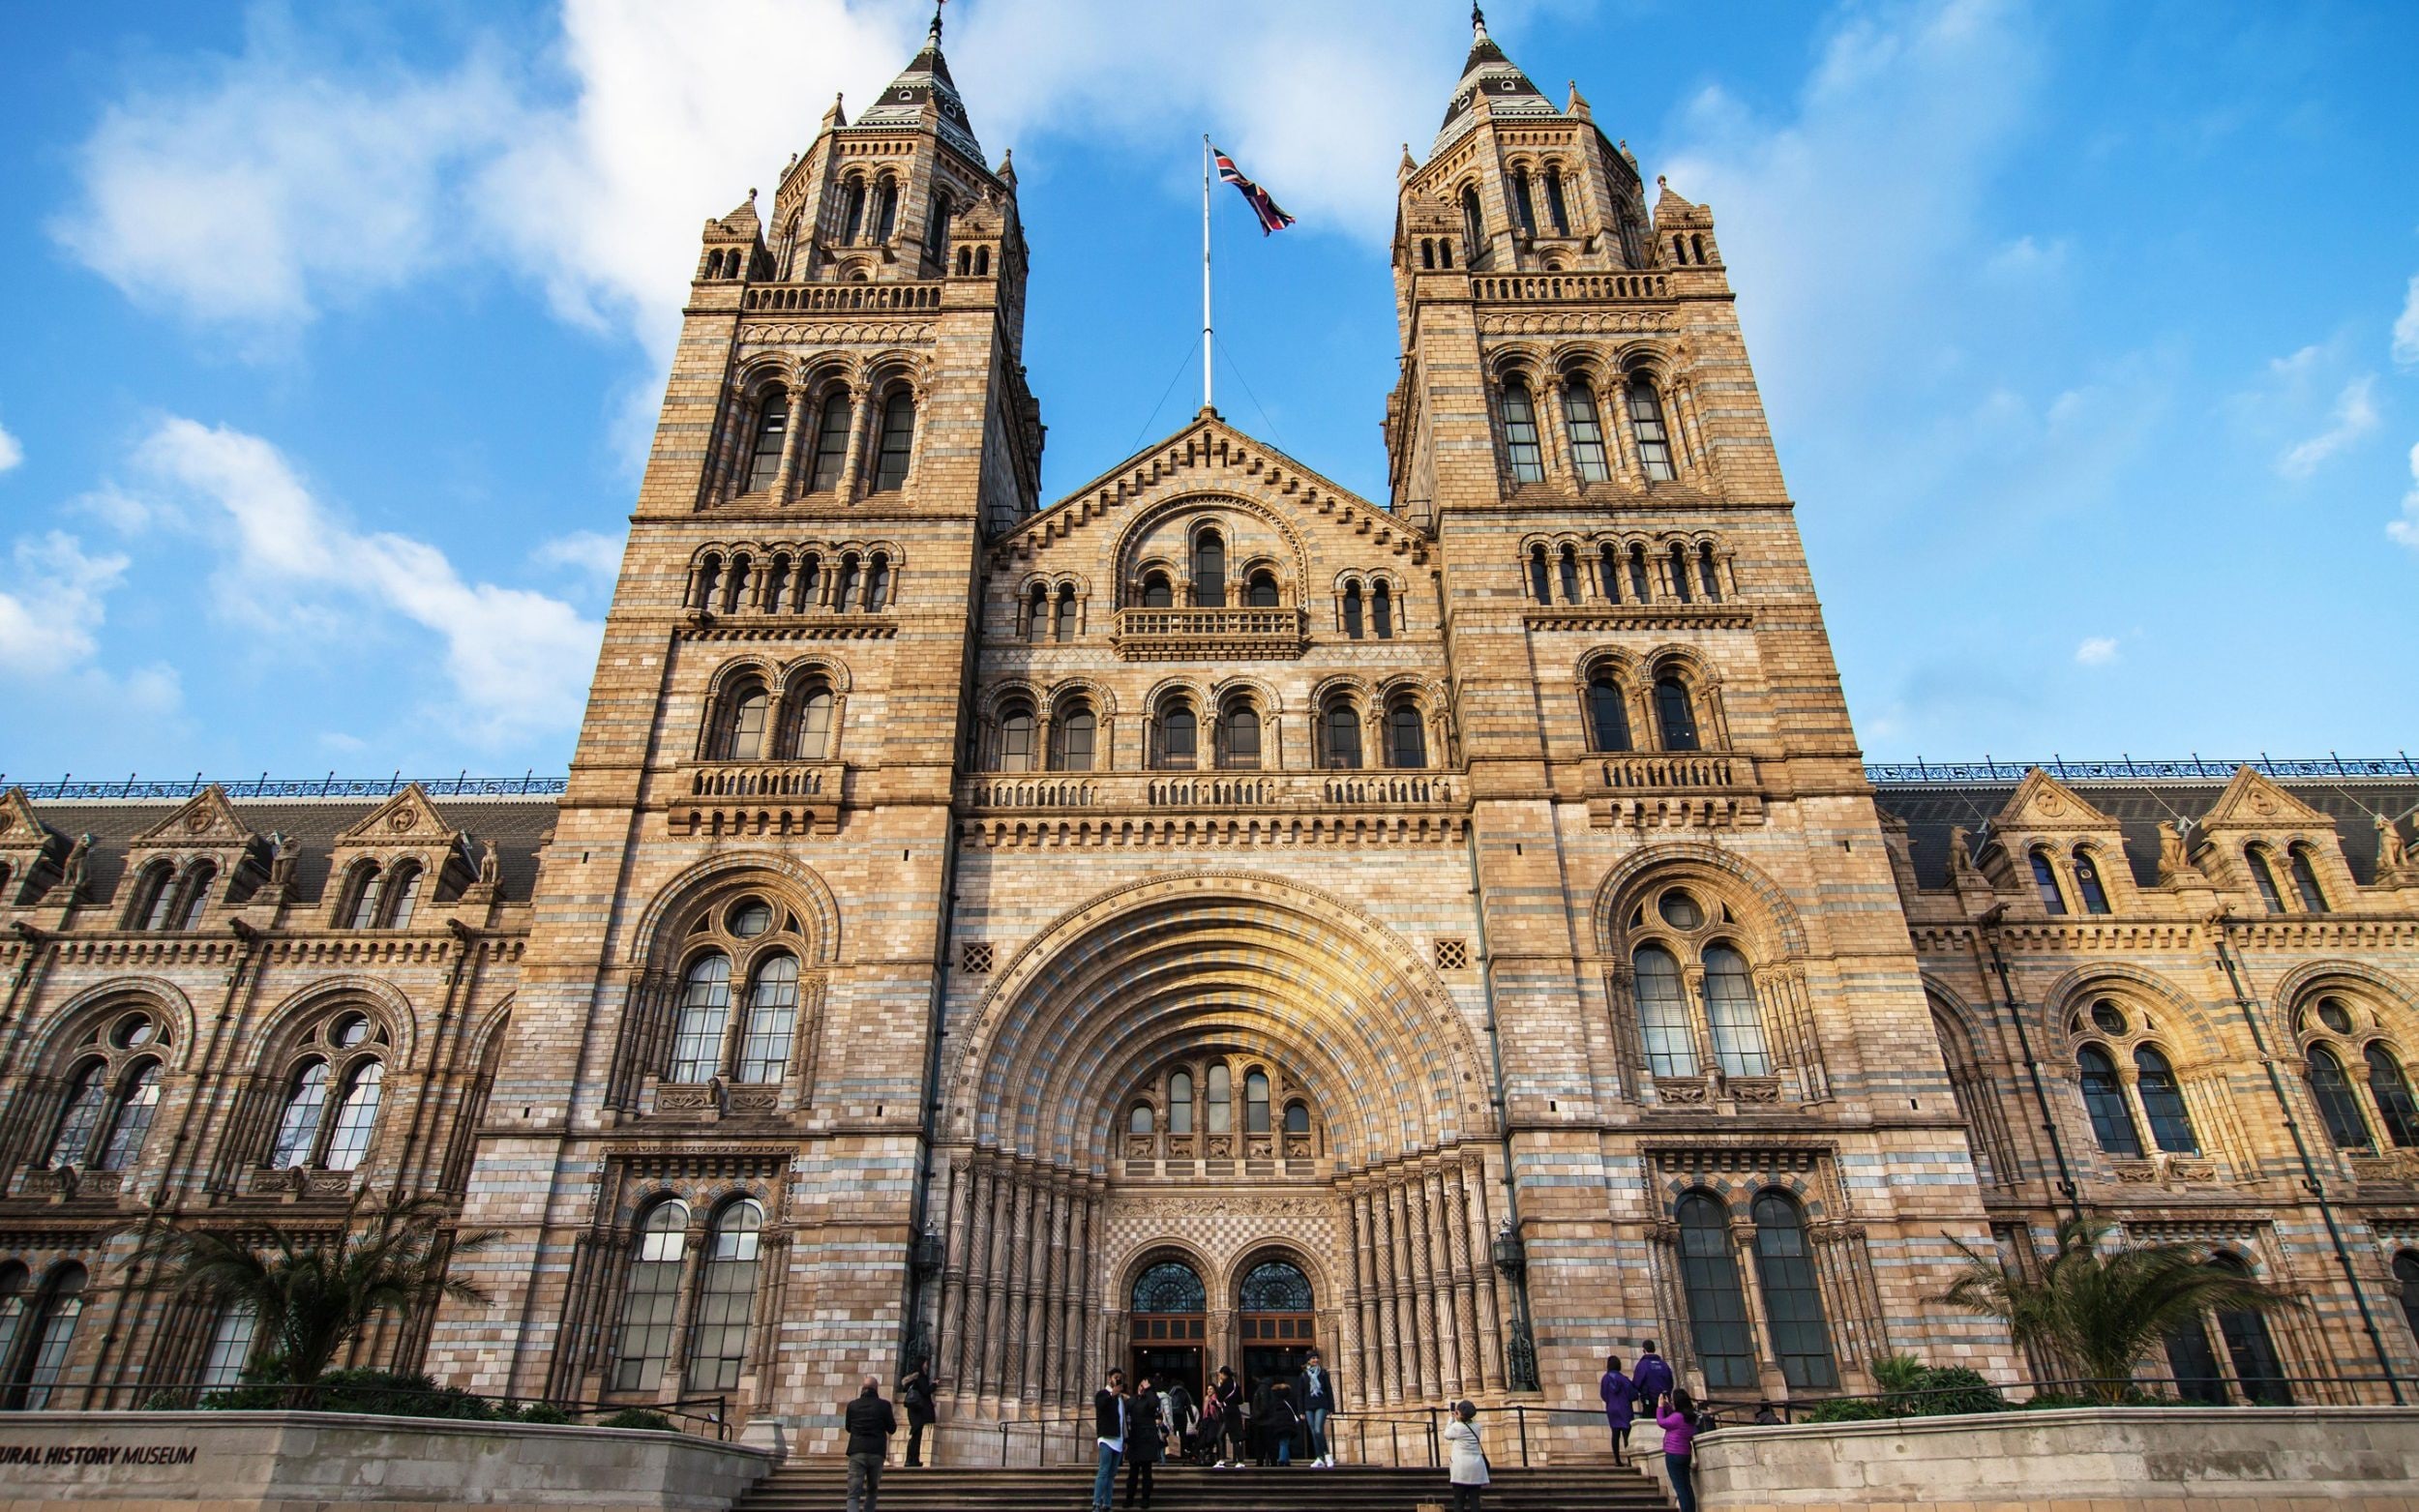 ‘it’s a self-imposed act of institutional vandalism’: inside the natural history museum’s controversial relocation